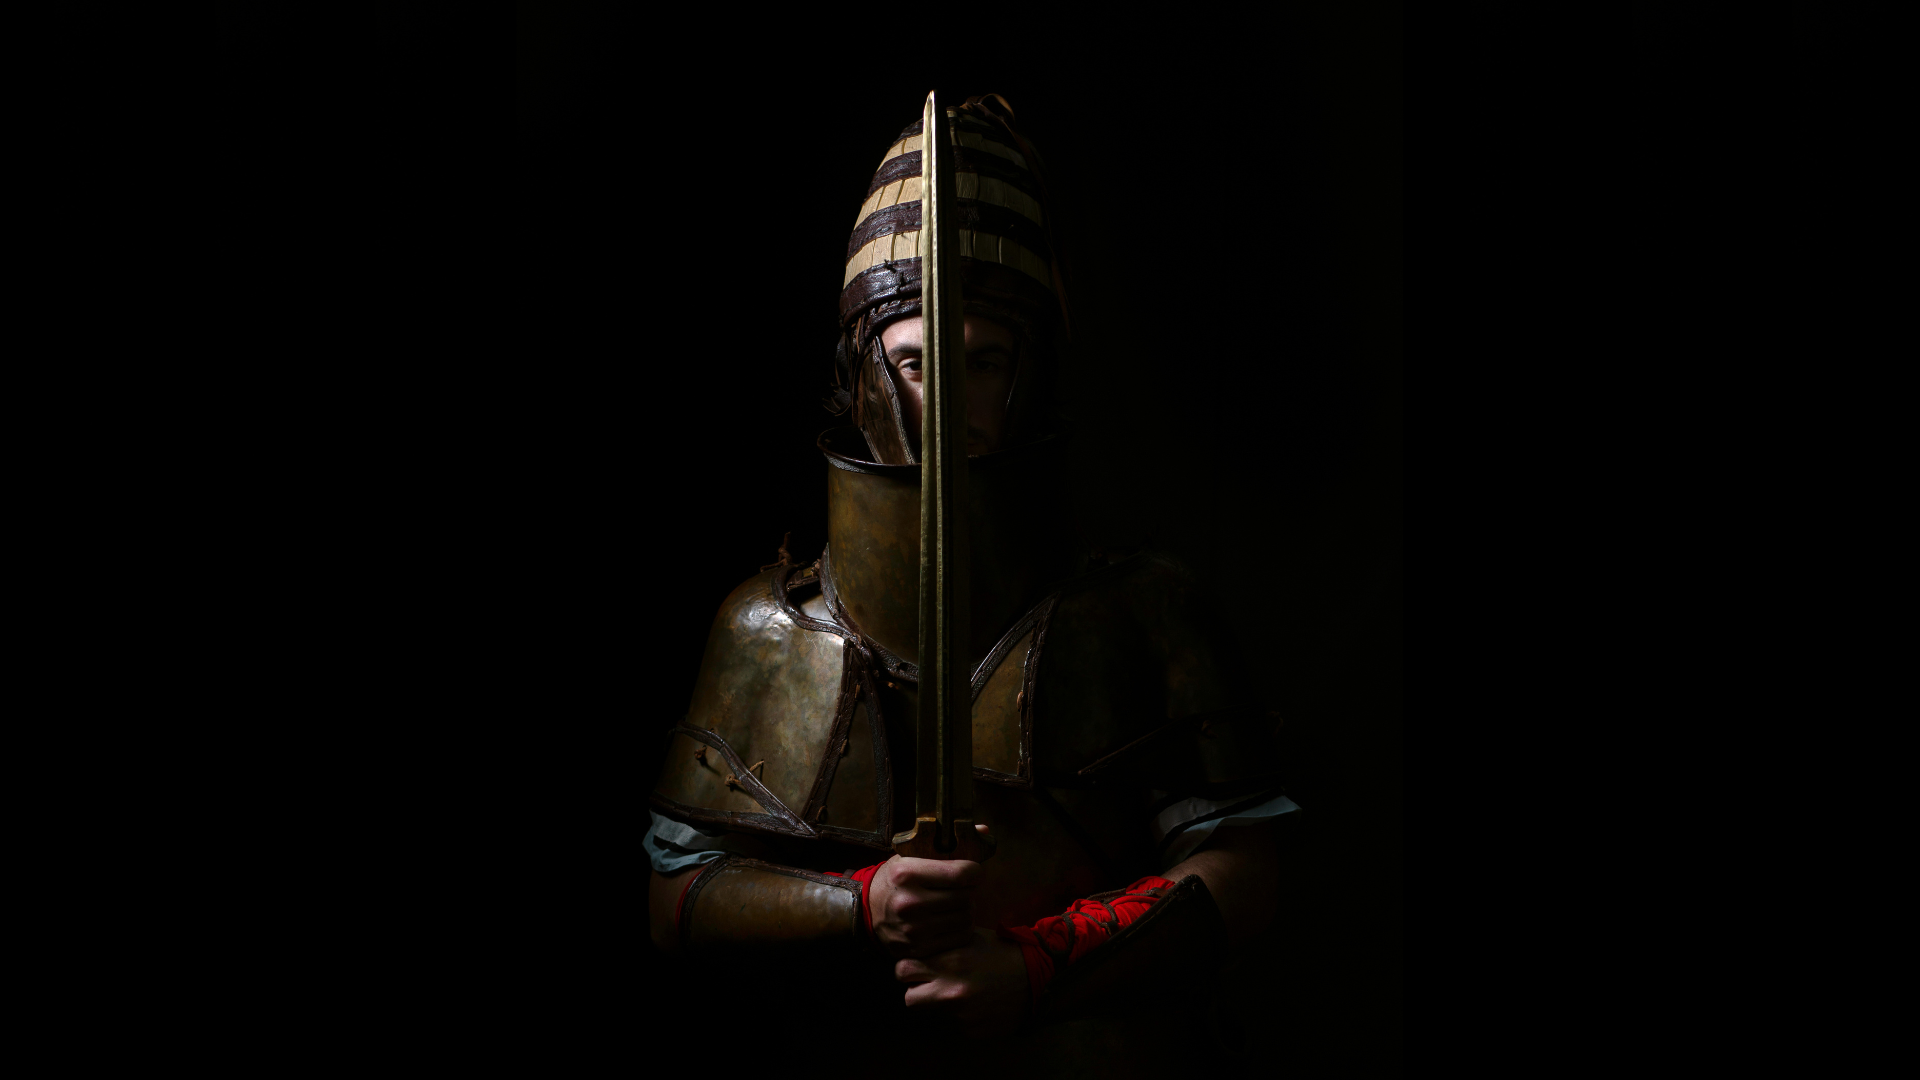 A man wearing the replica armour and holding a sword against a black background